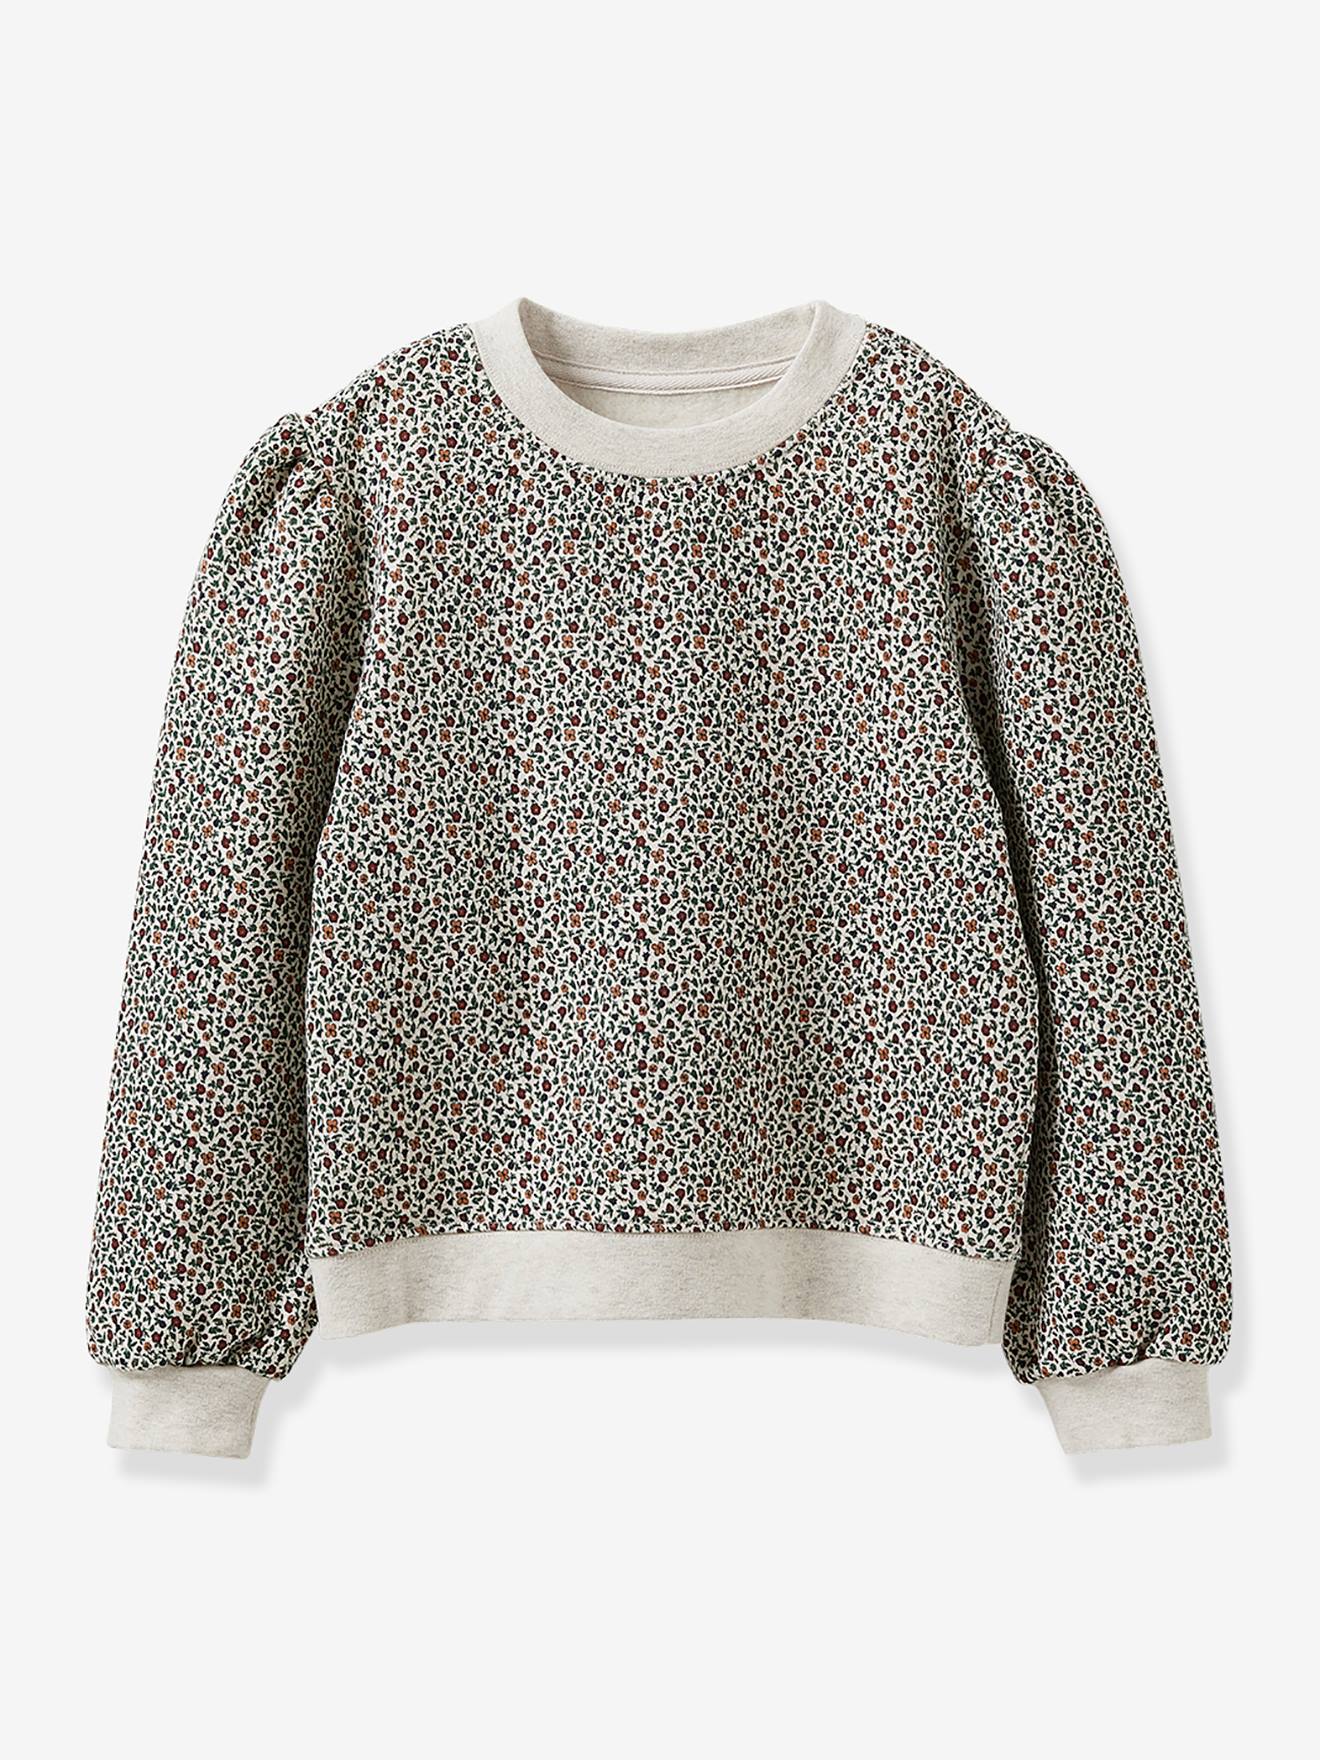 Sweatshirt with Rosemary Print in Organic Cotton for Girls, by CYRILLUS printed white